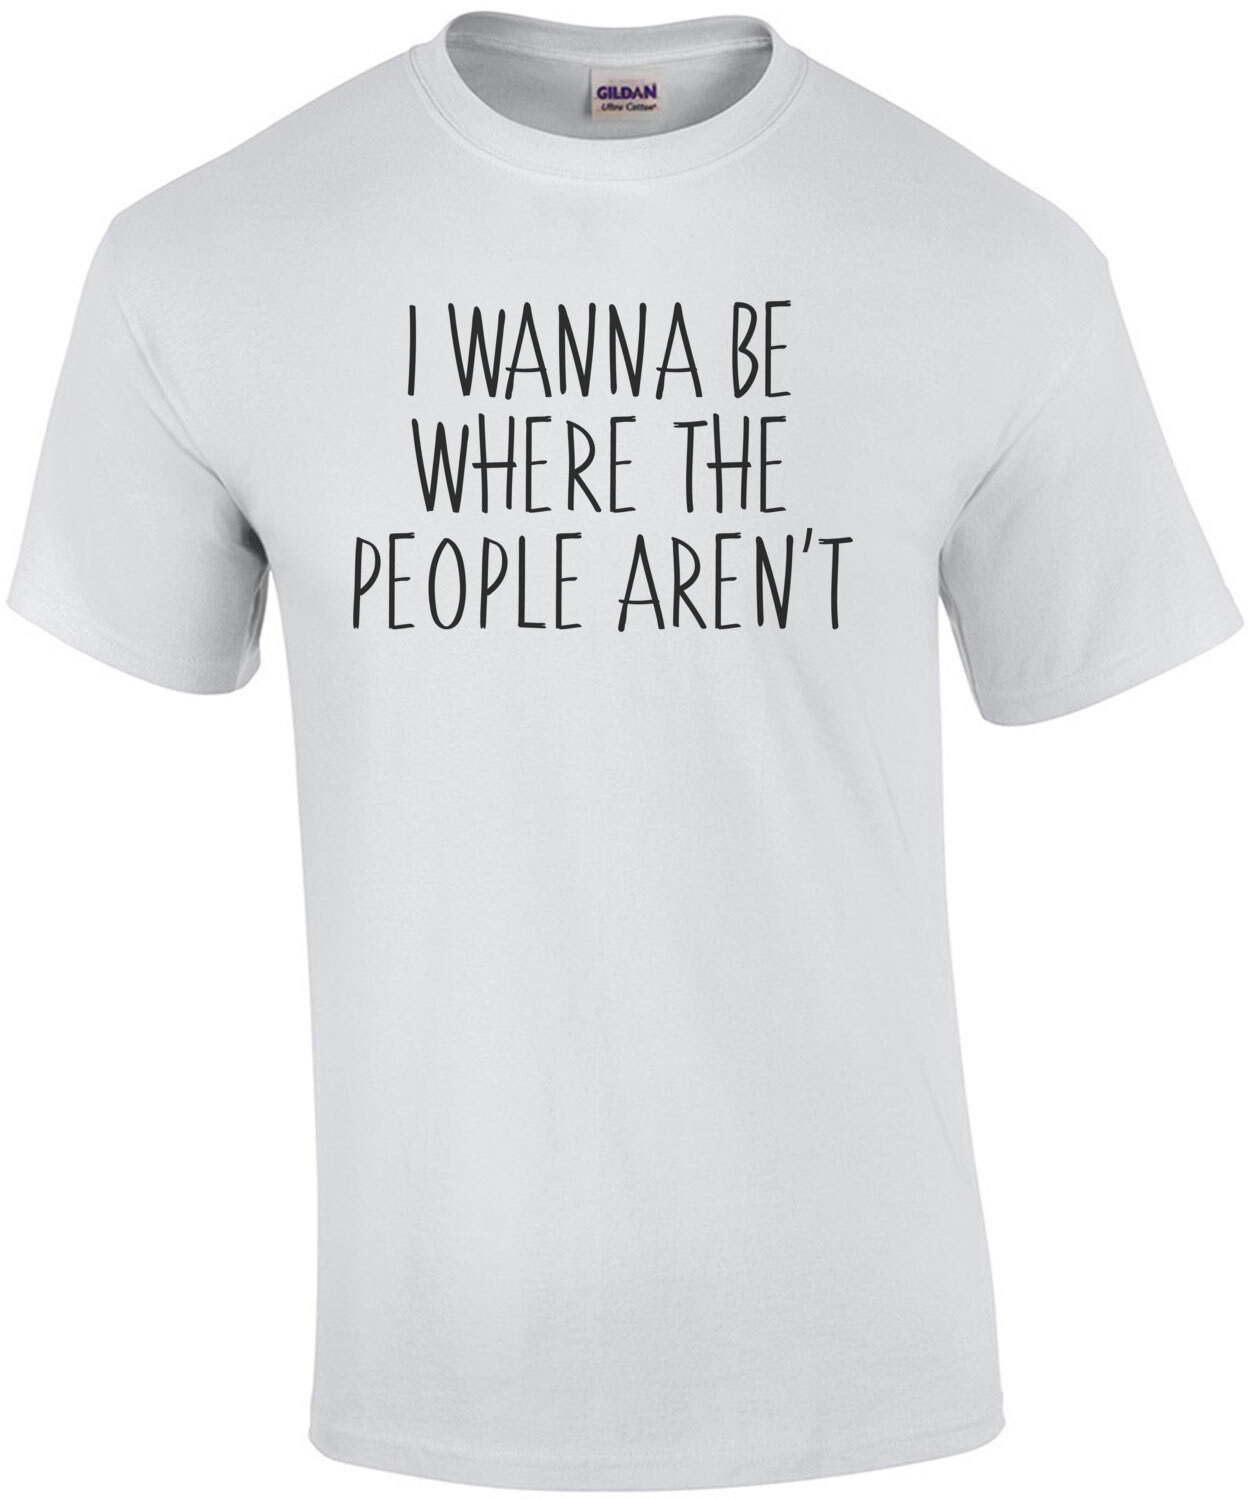 I wanna be where the people arent - funny t-shirt